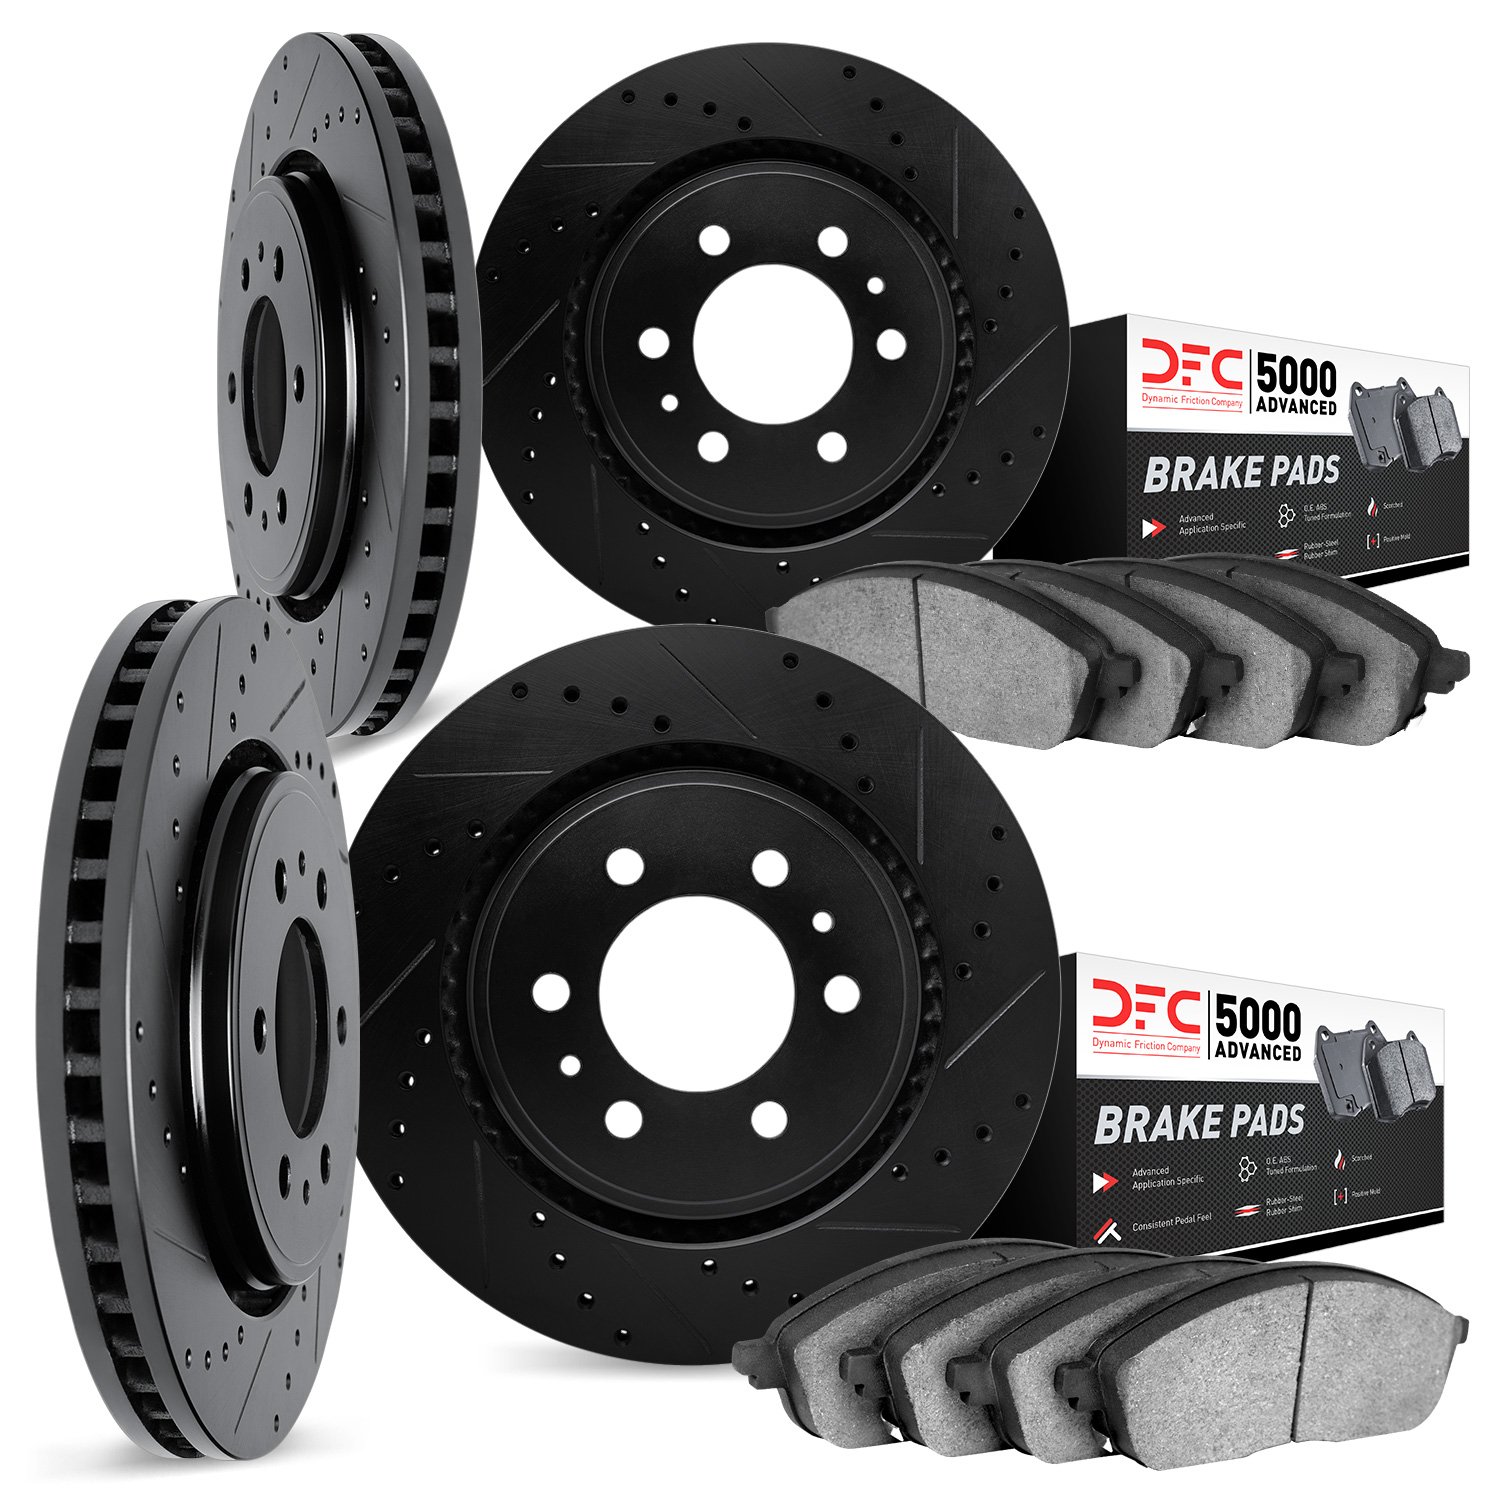 8504-67114 Drilled/Slotted Brake Rotors w/5000 Advanced Brake Pads Kit [Black], Fits Select Infiniti/Nissan, Position: Front and